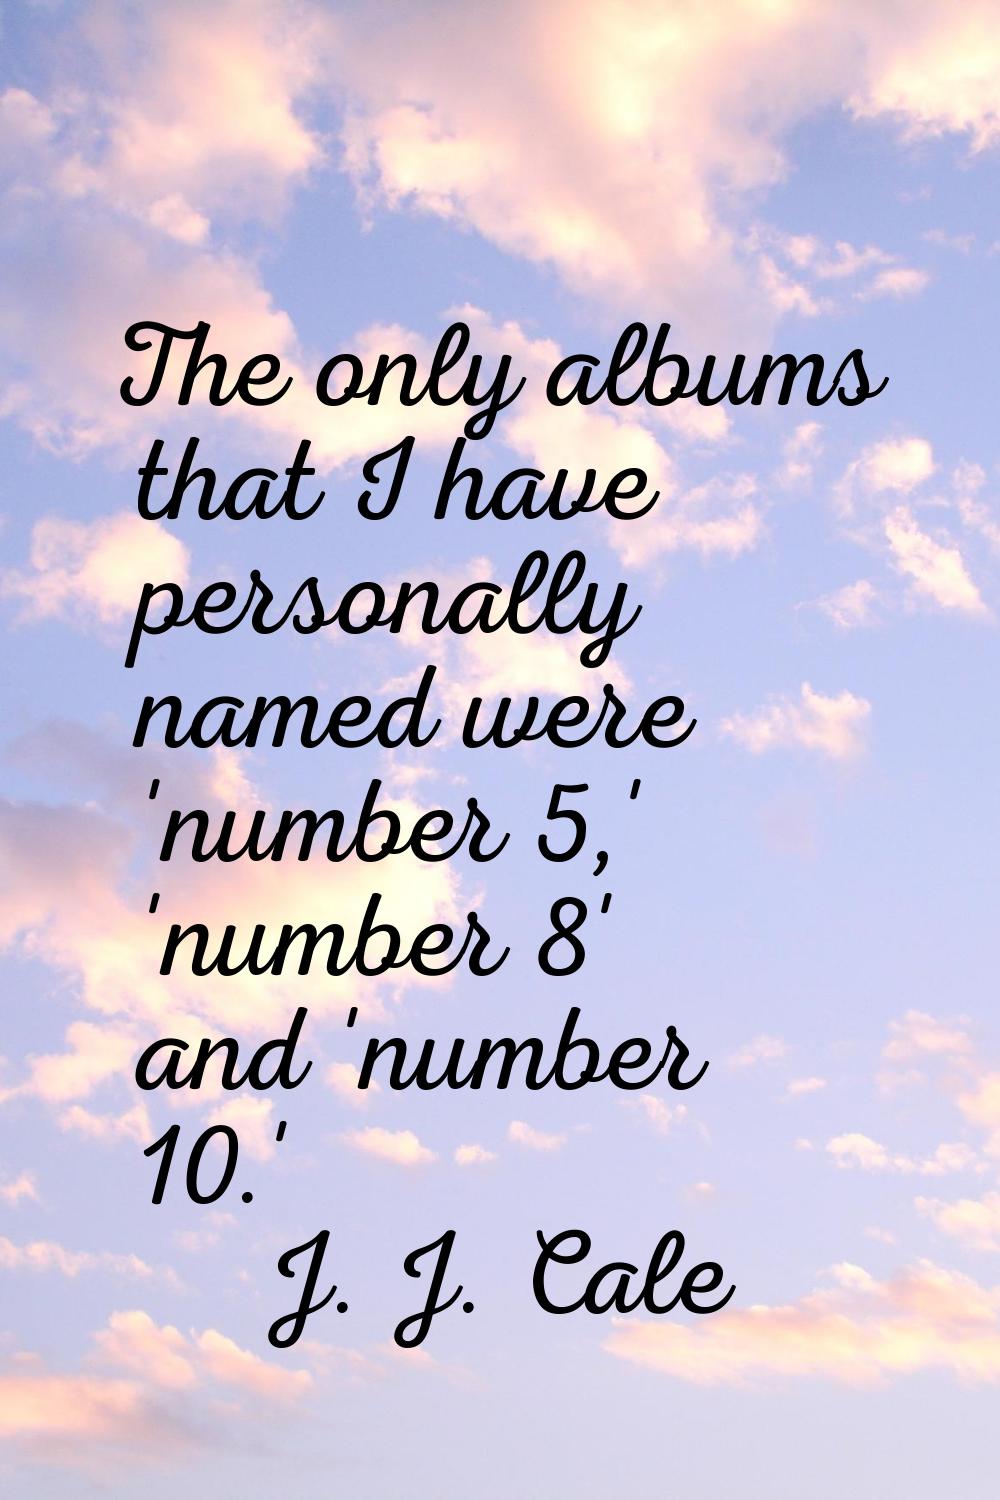 The only albums that I have personally named were 'number 5,' 'number 8' and 'number 10.'